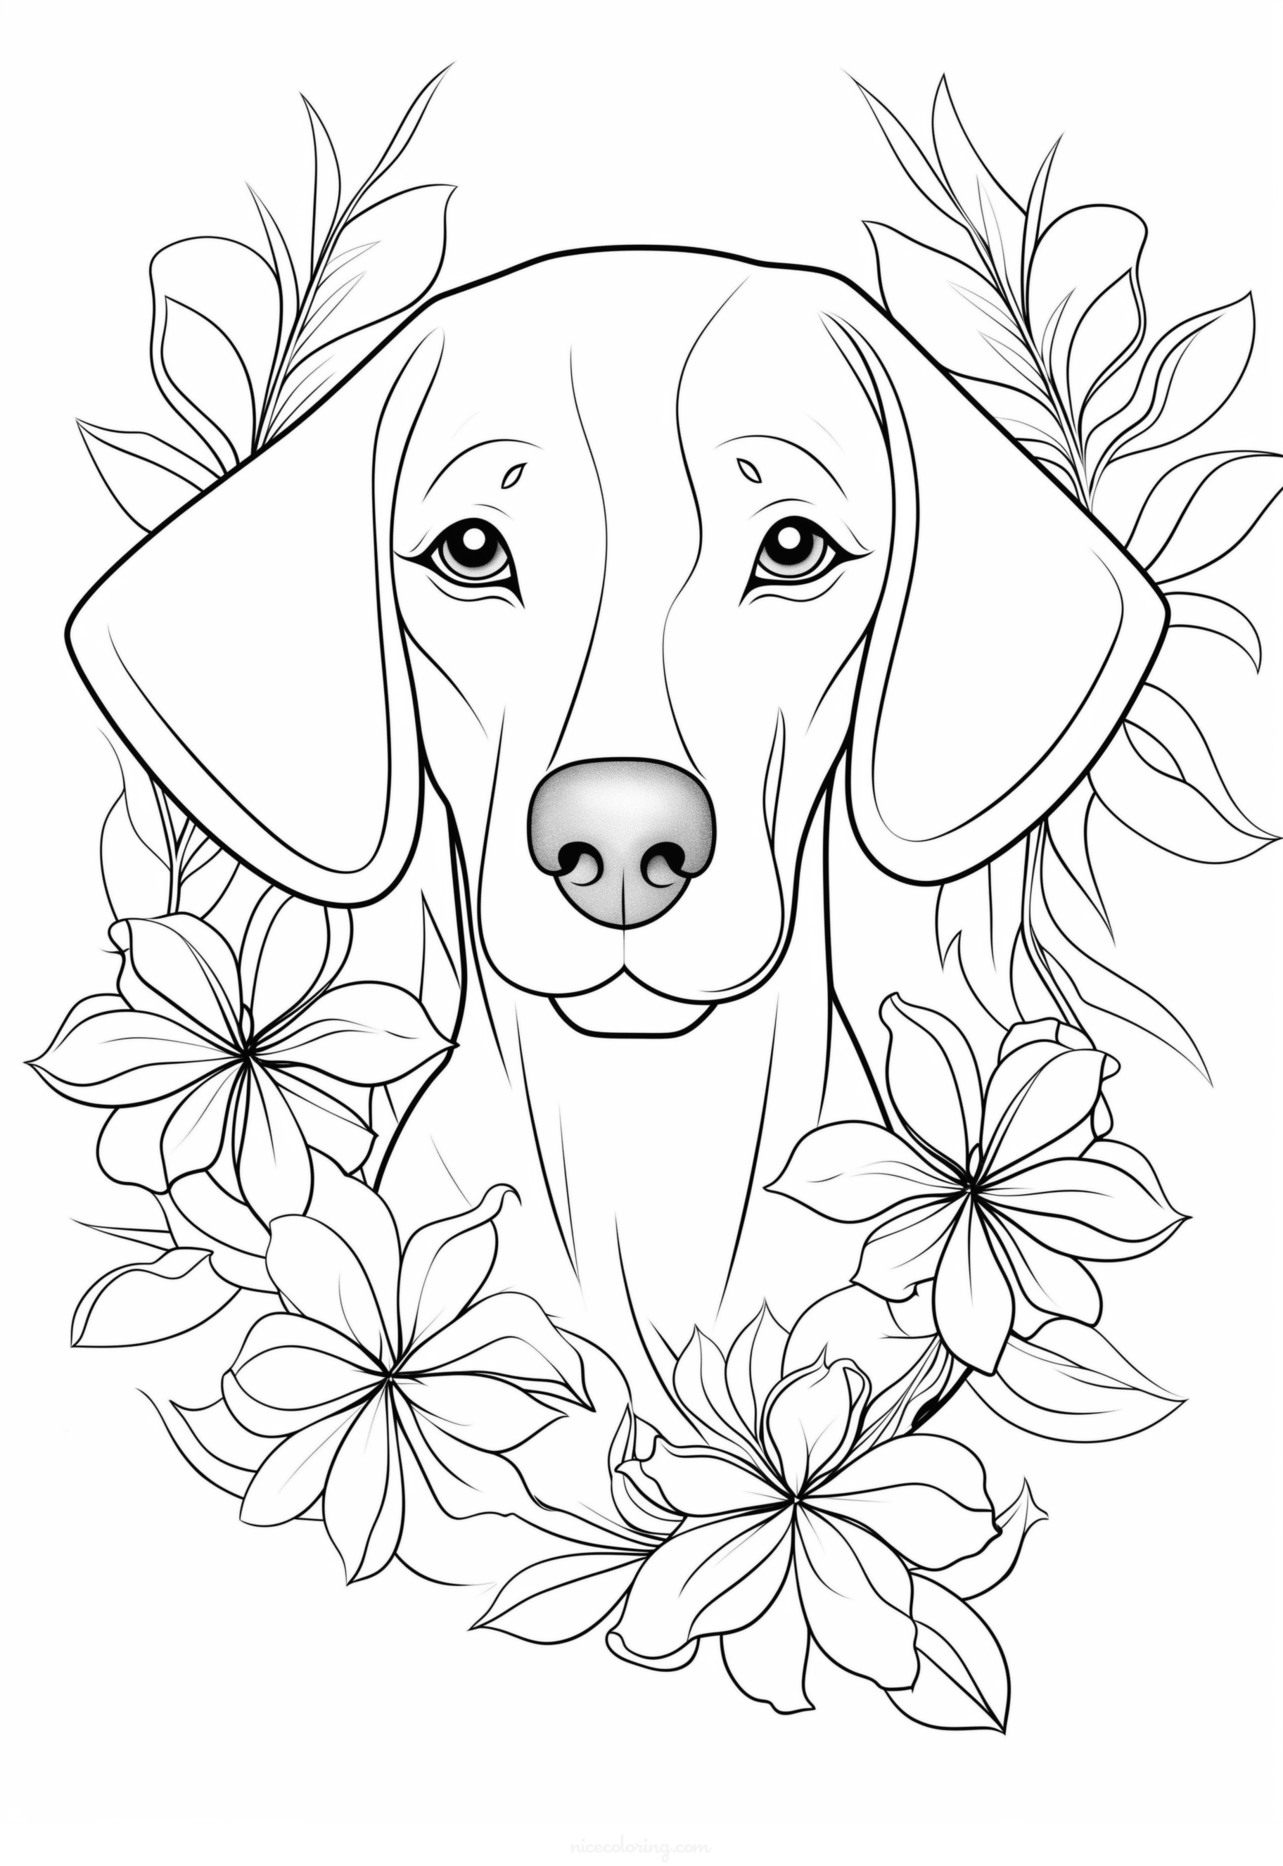 Playful dog waiting to be colored